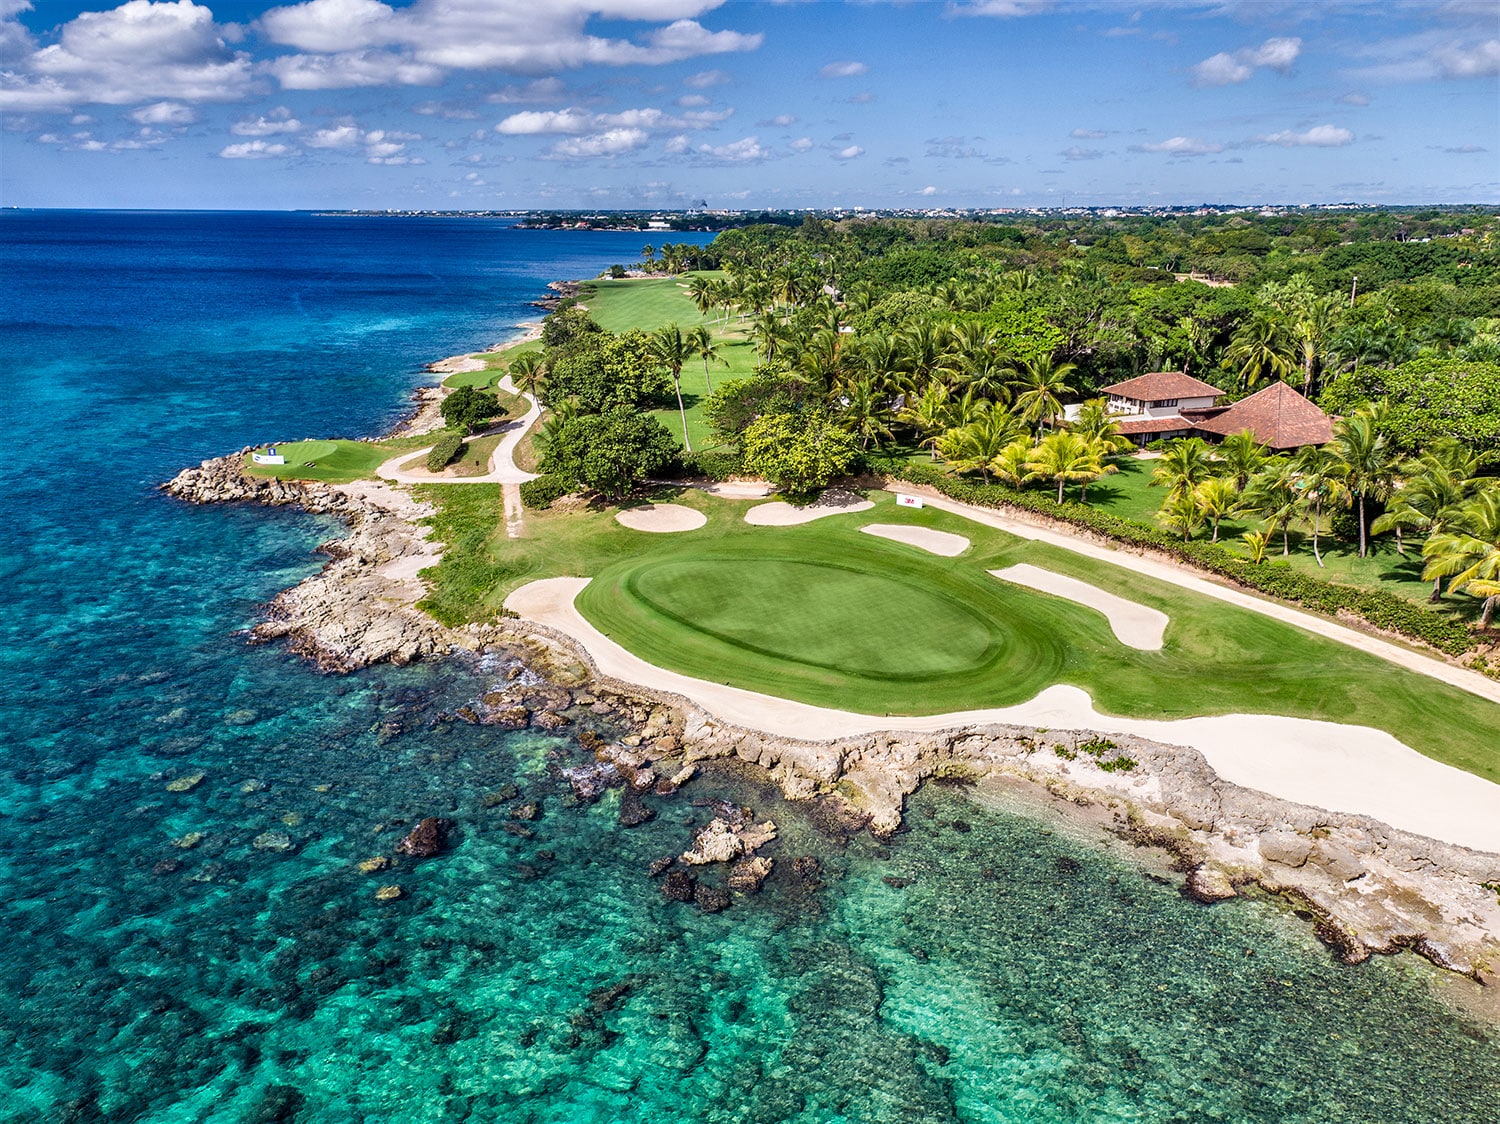 An aerial view of the Teeth of the Dog golf course at Casa de Campo Resort and Villas in the Dominican Republic.